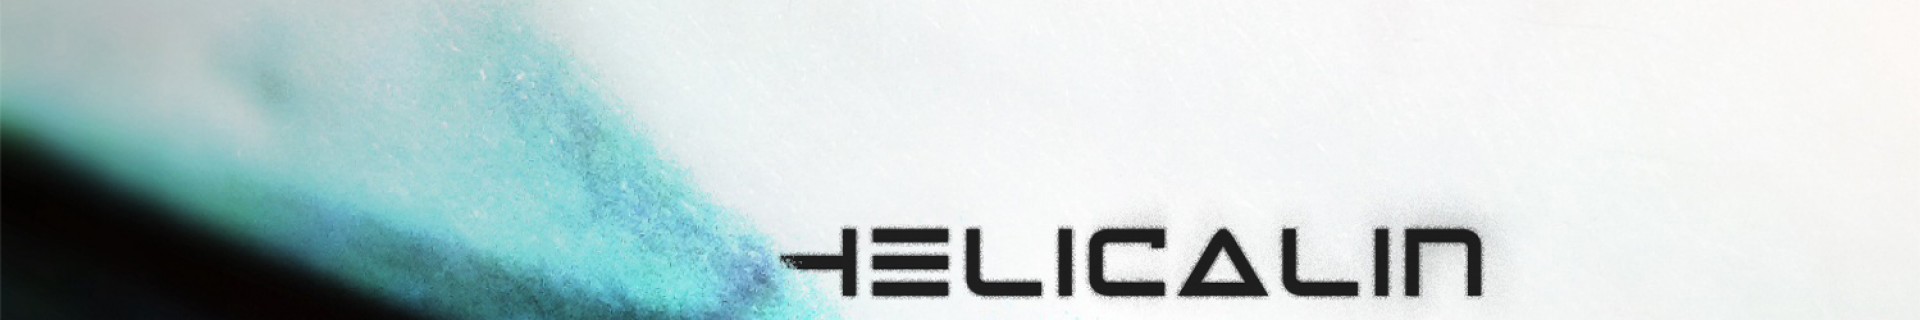 Helicalin profile cover